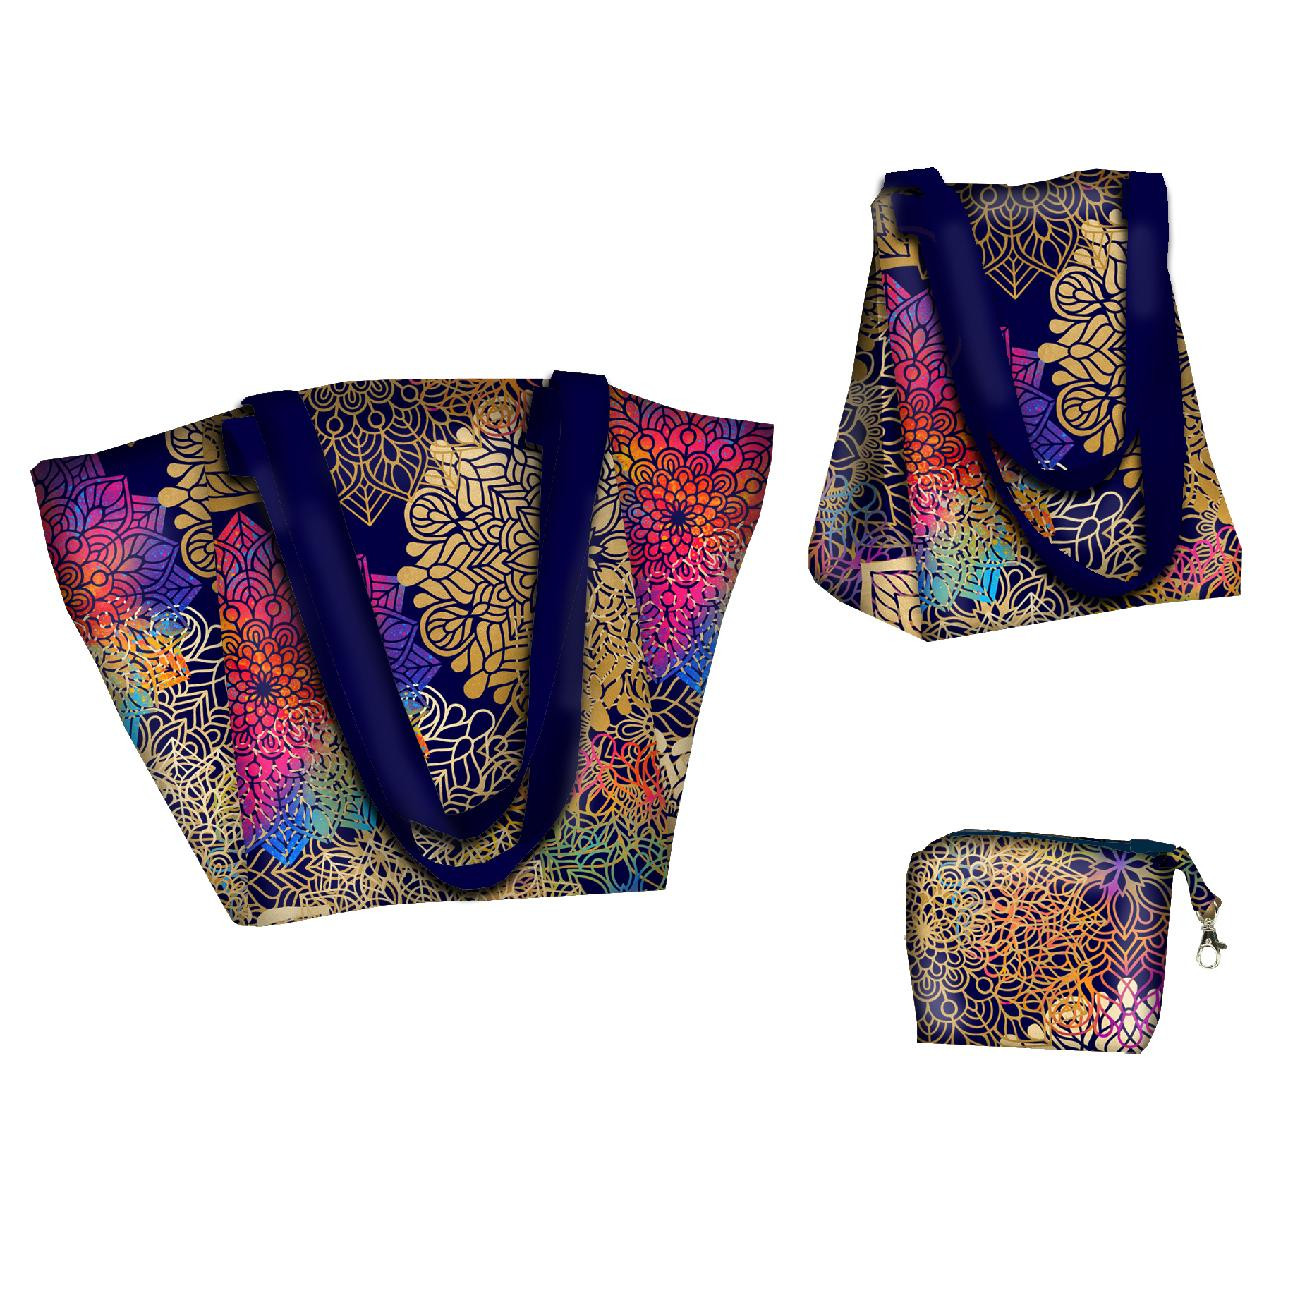 XL bag with in-bag pouch 2 in 1 - MANDALA pat. 2 - sewing set